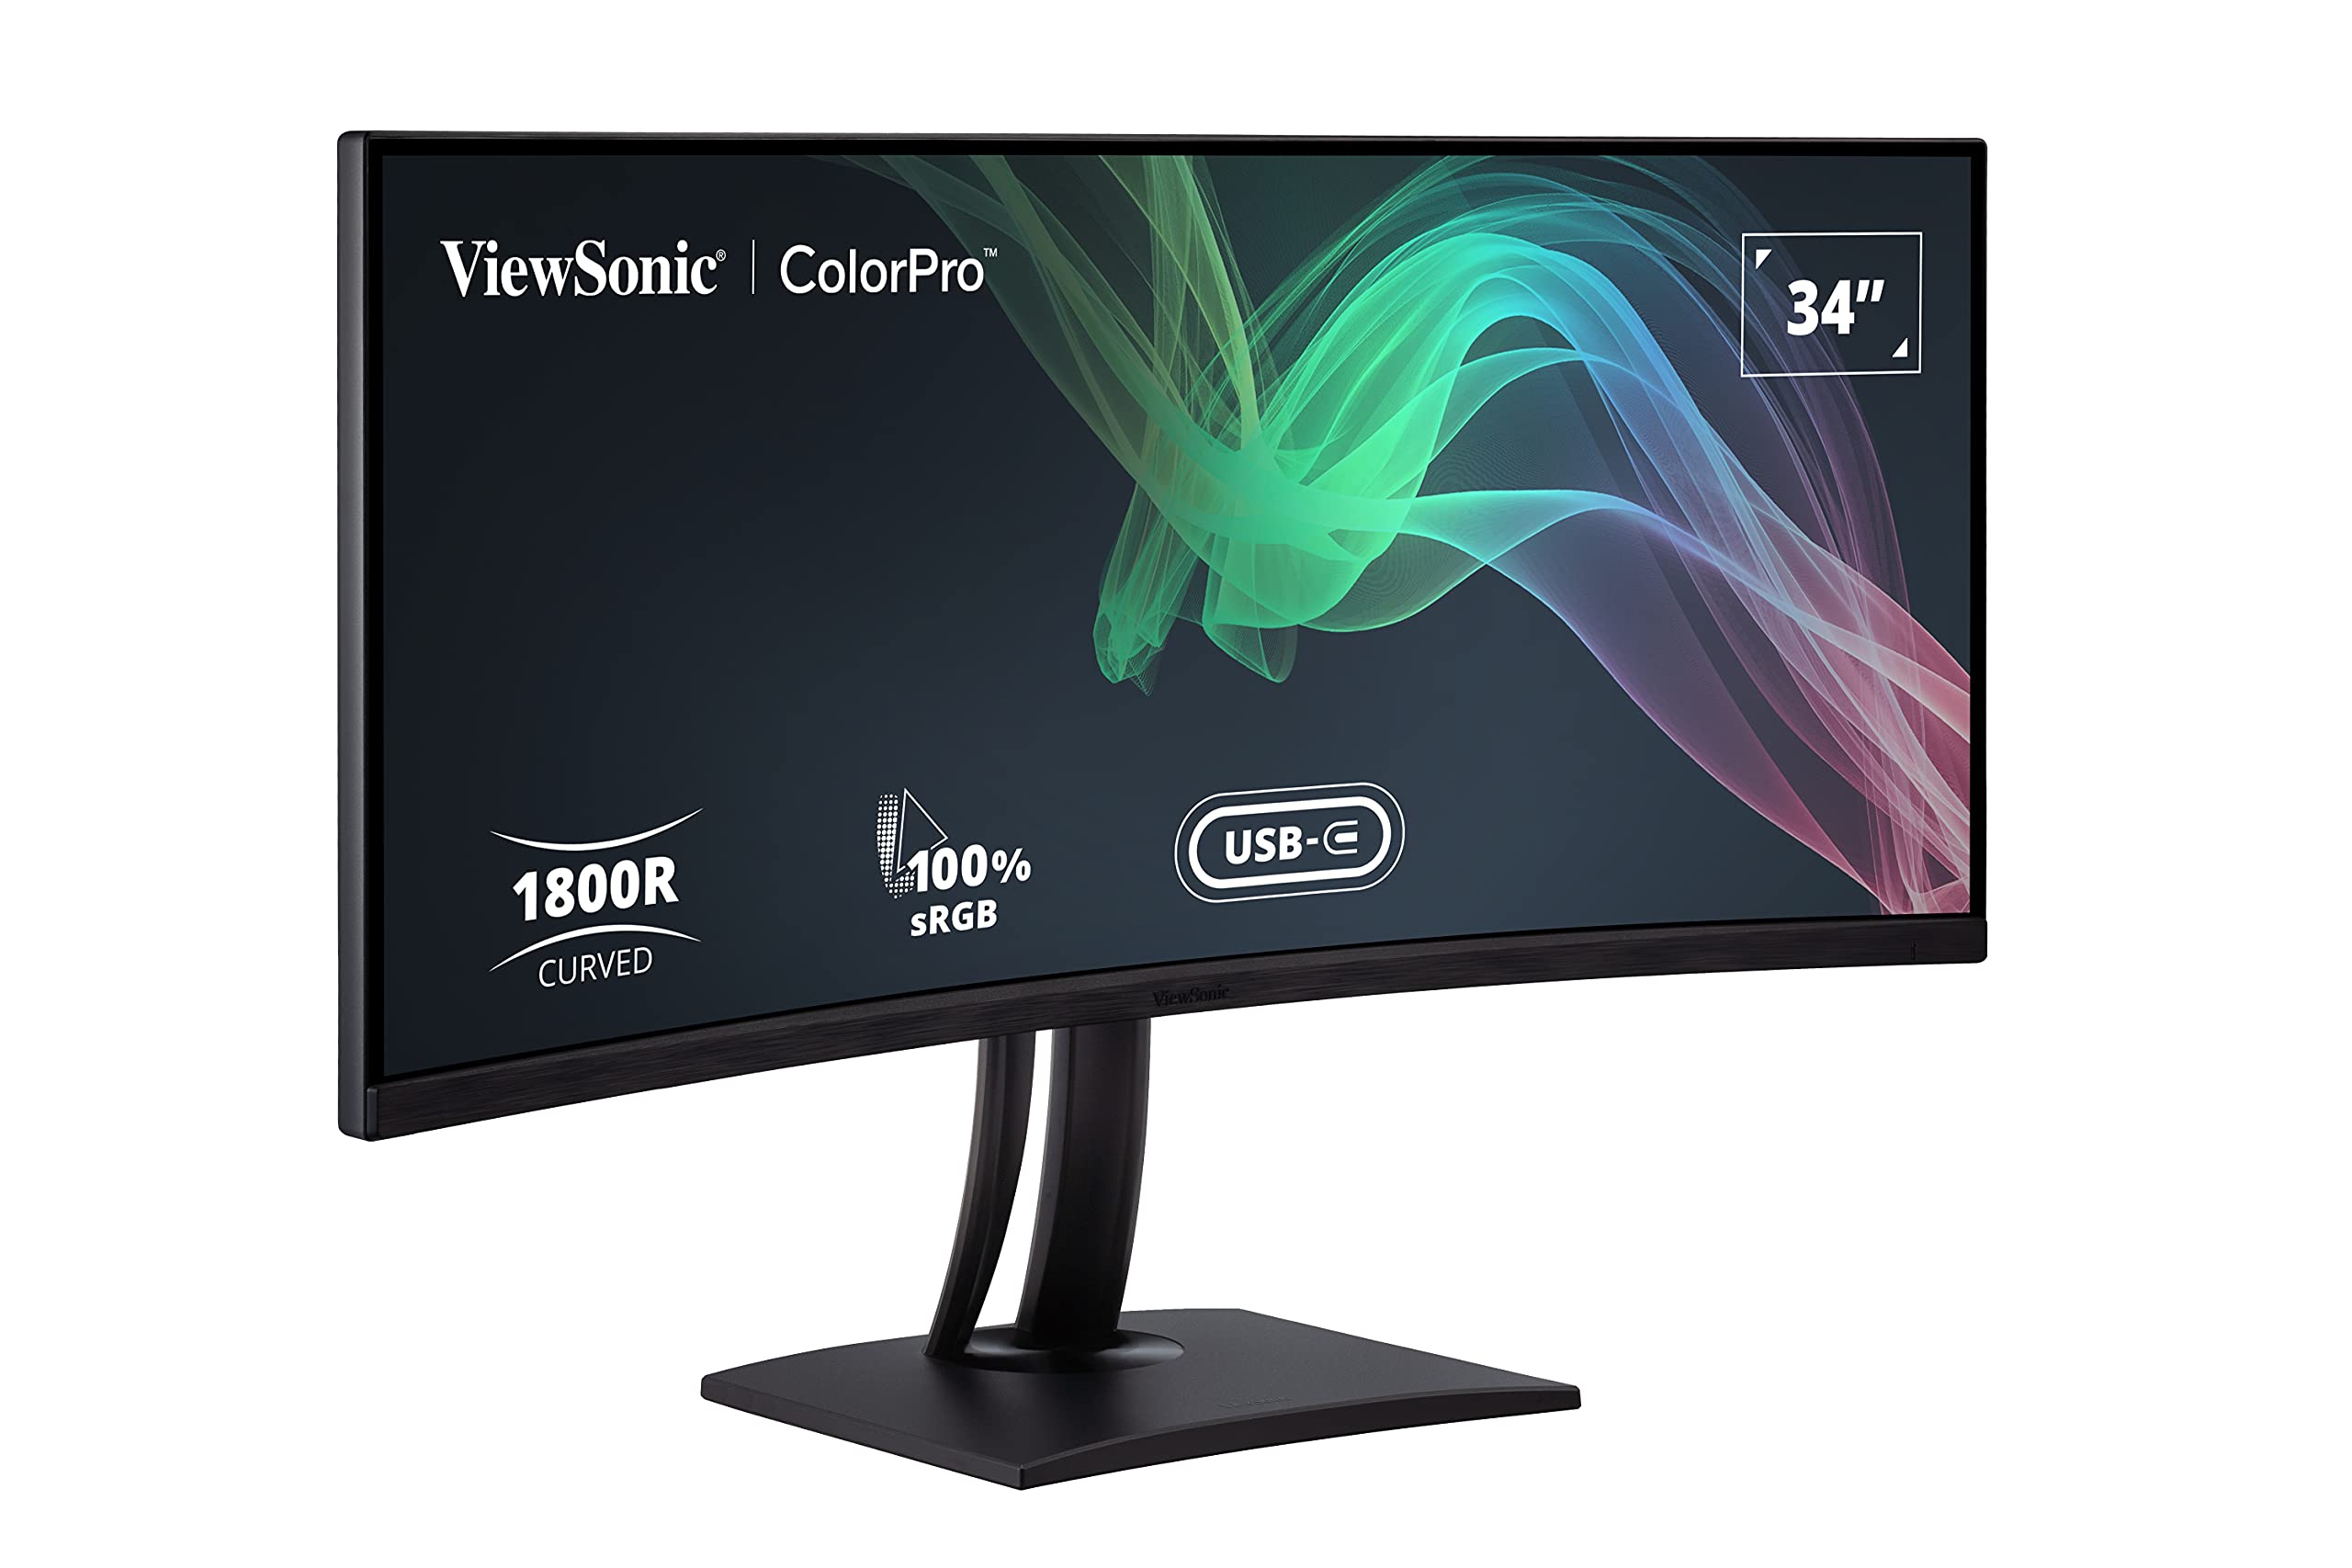 ViewSonic VP3481a 34-Inch WQHD+ Curved Ultrawide USB C Monitor with FreeSync, 100Hz, ColorPro 100% sRGB Rec 709, 14-bit 3D LUT, Eye Care, 90W USB C, HDMI, DisplayPort for Home and Office,Black